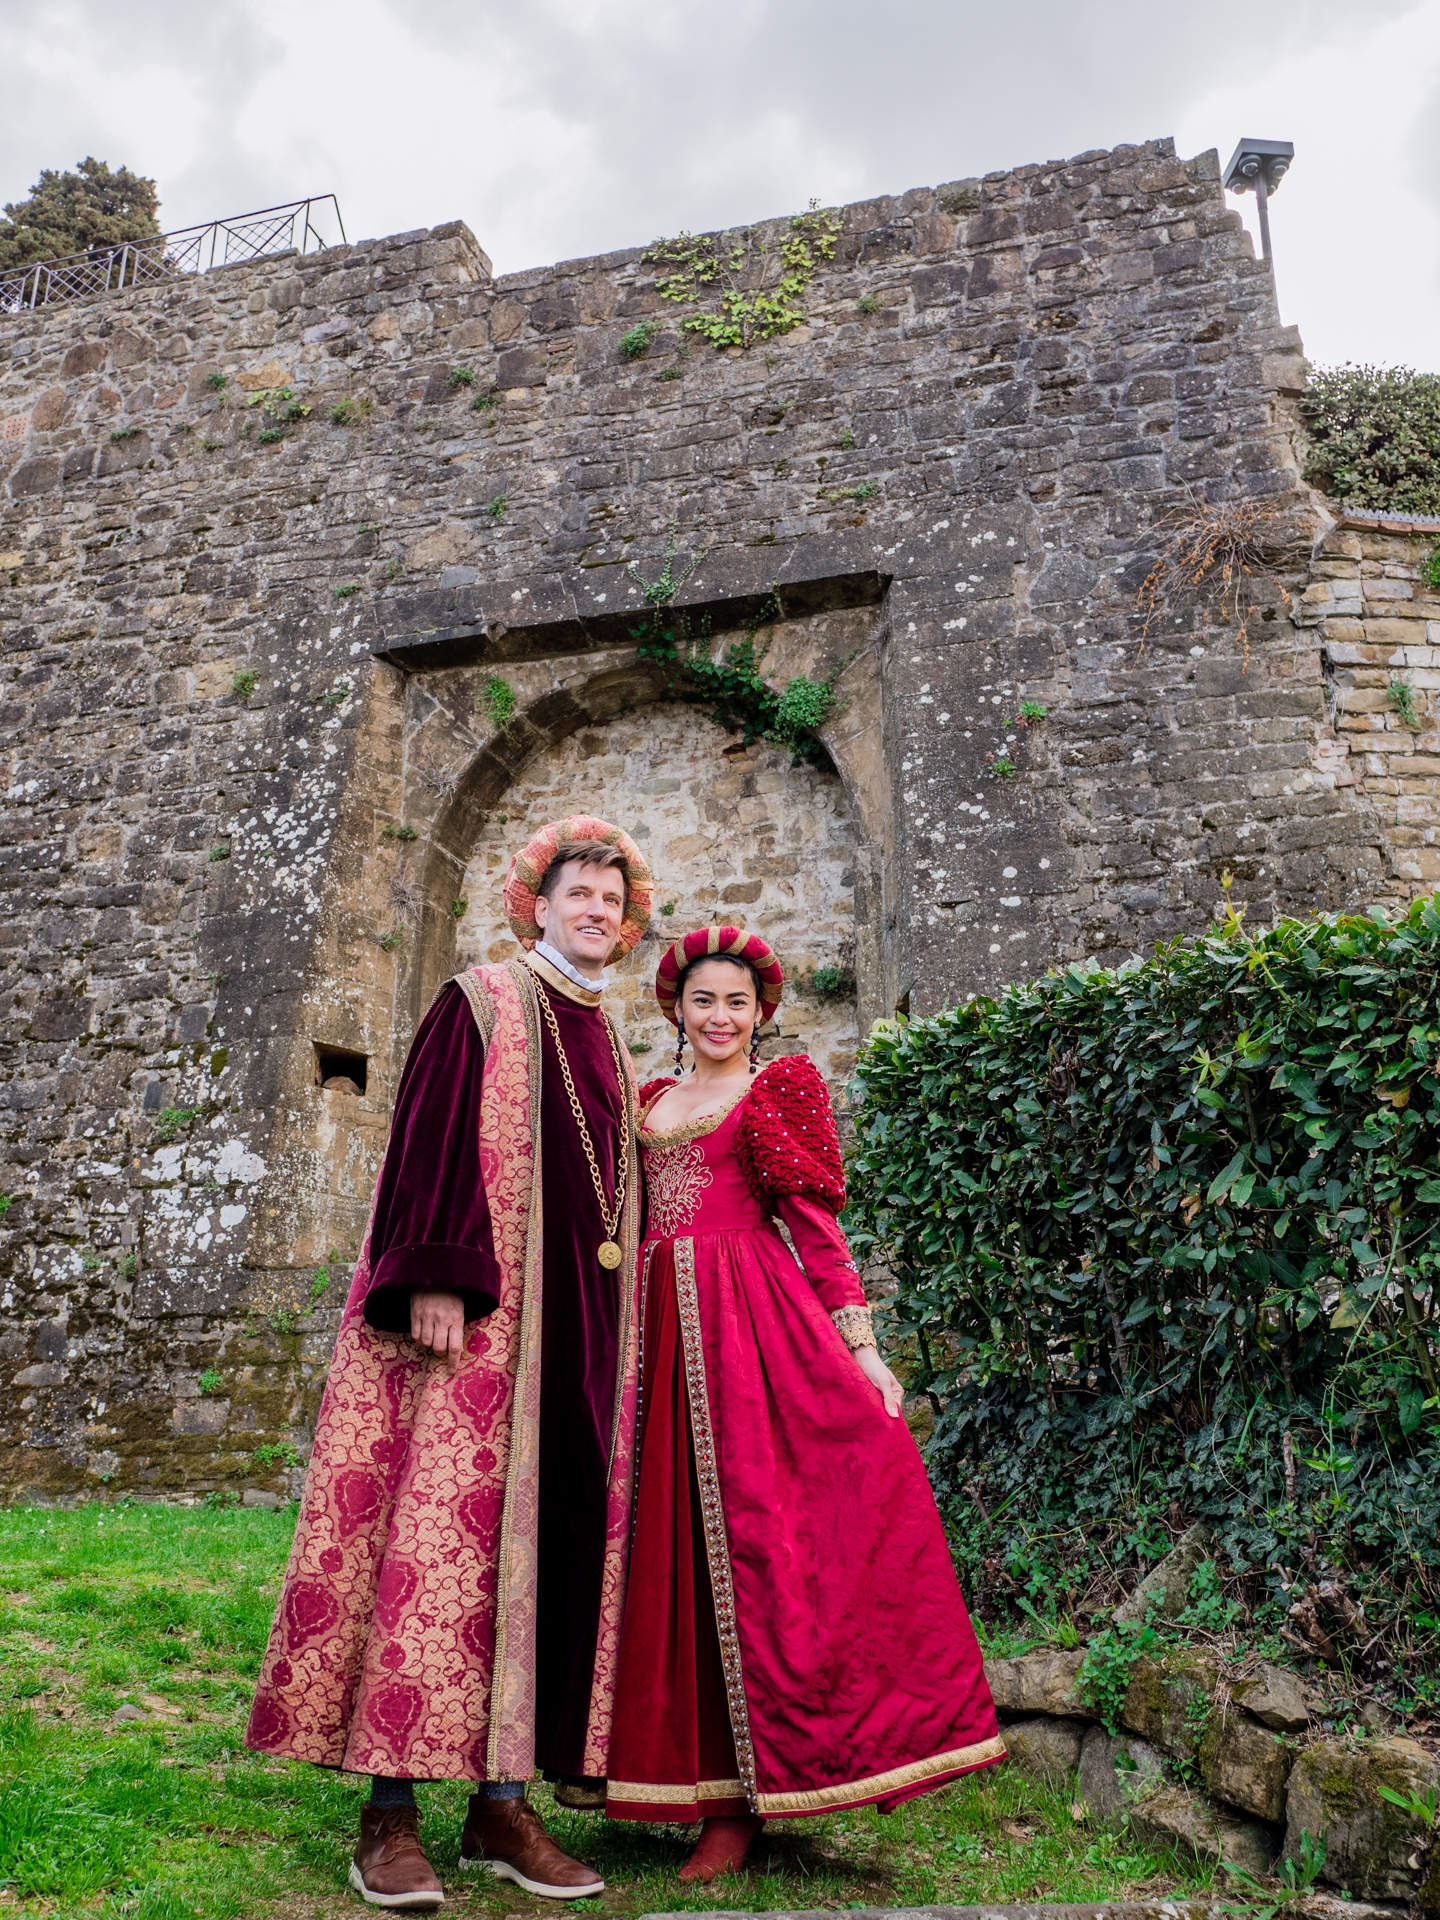 ﻿Book a Photoshoot in Florence Medieval Renaissance costumes